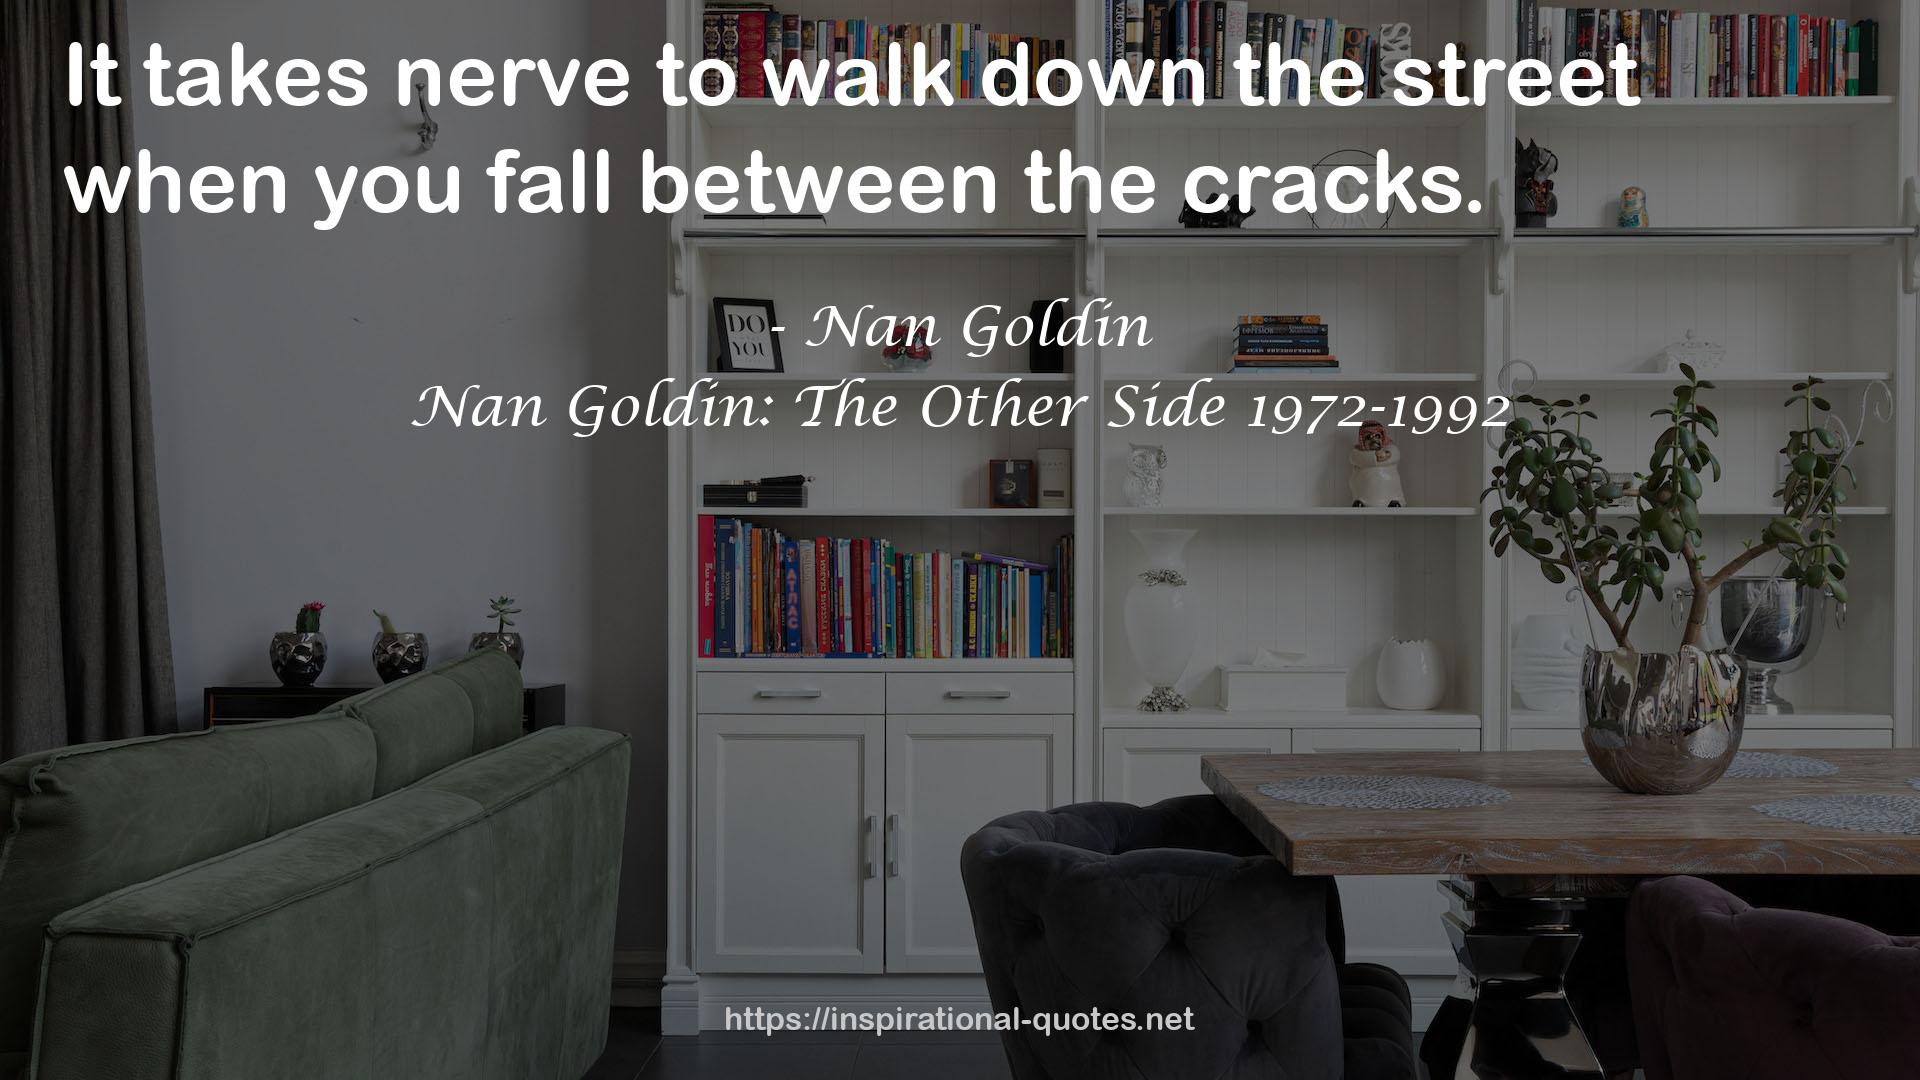 Nan Goldin: The Other Side 1972-1992 QUOTES